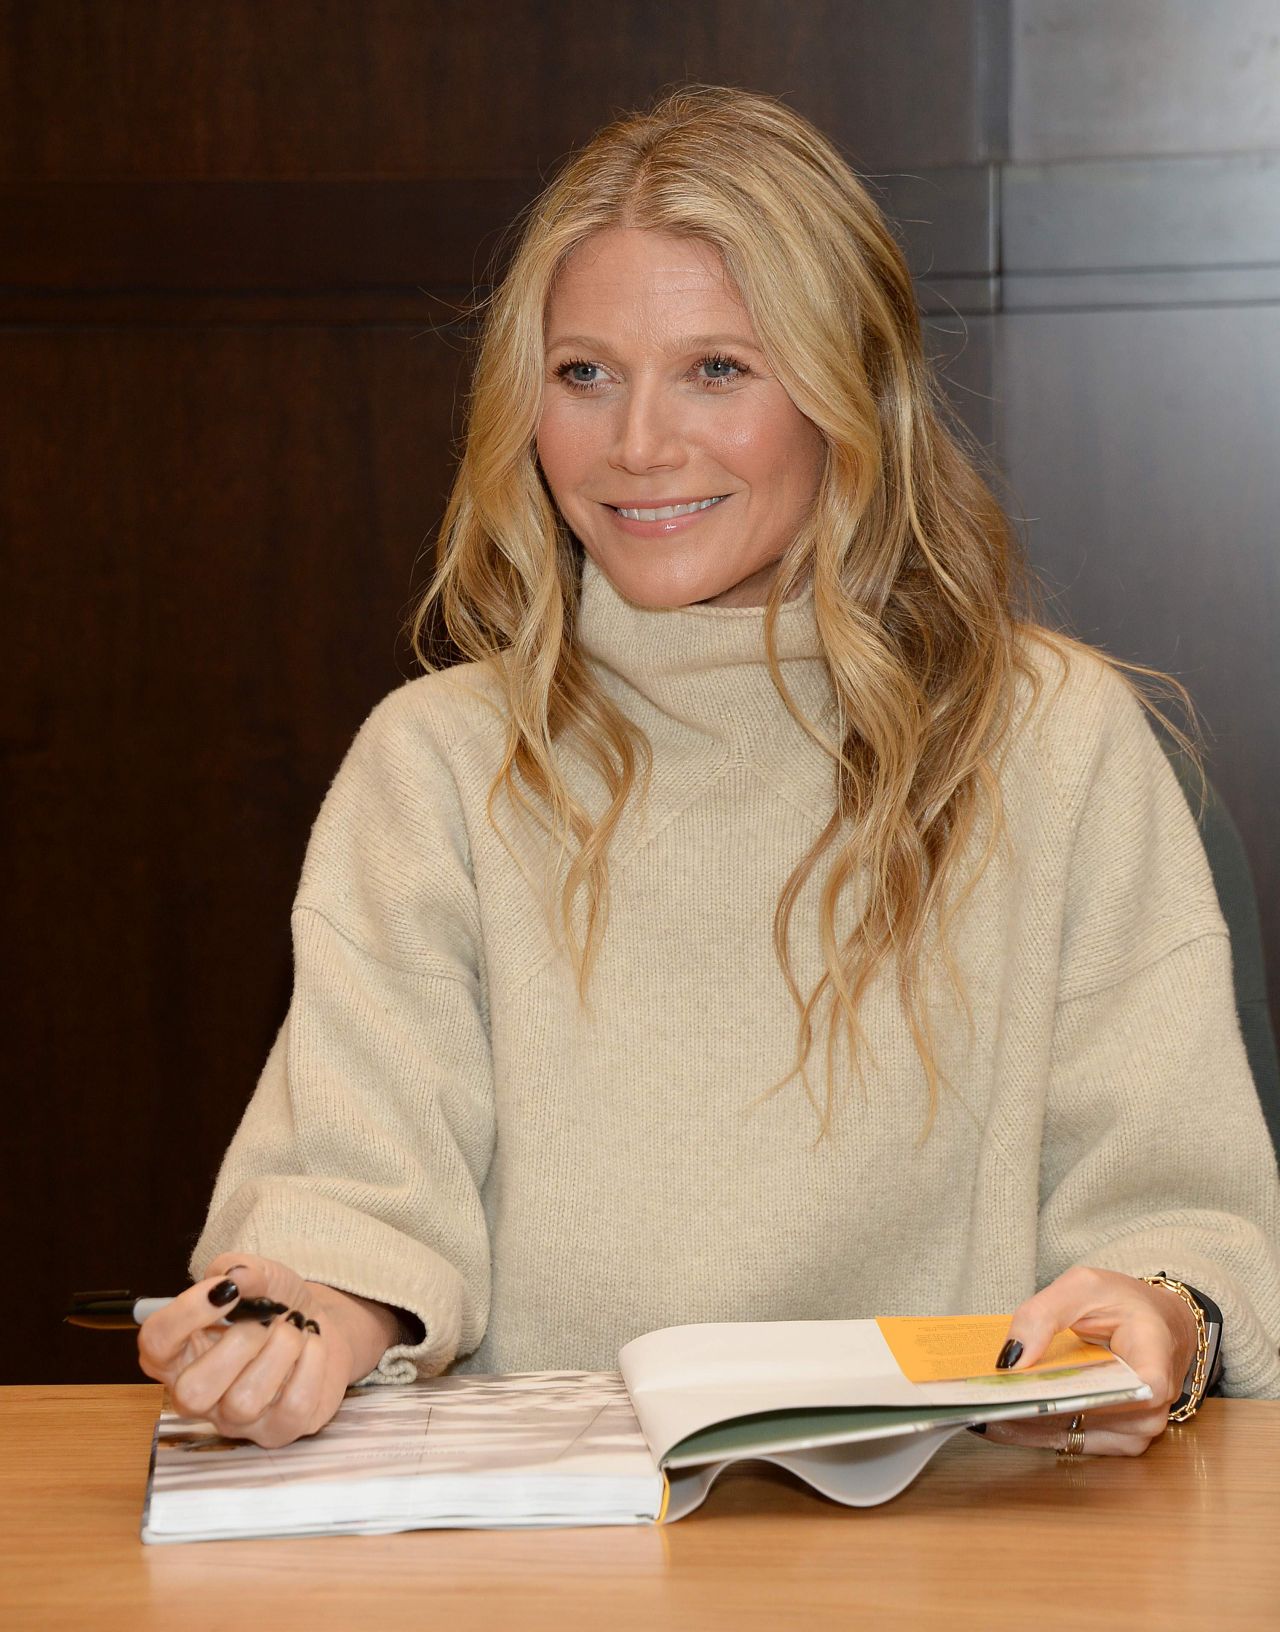 https://celebmafia.com/wp-content/uploads/2019/01/gwyneth-paltrow-the-clean-plate-eat-reset-heal-book-signing-in-la-01-14-2019-0.jpg